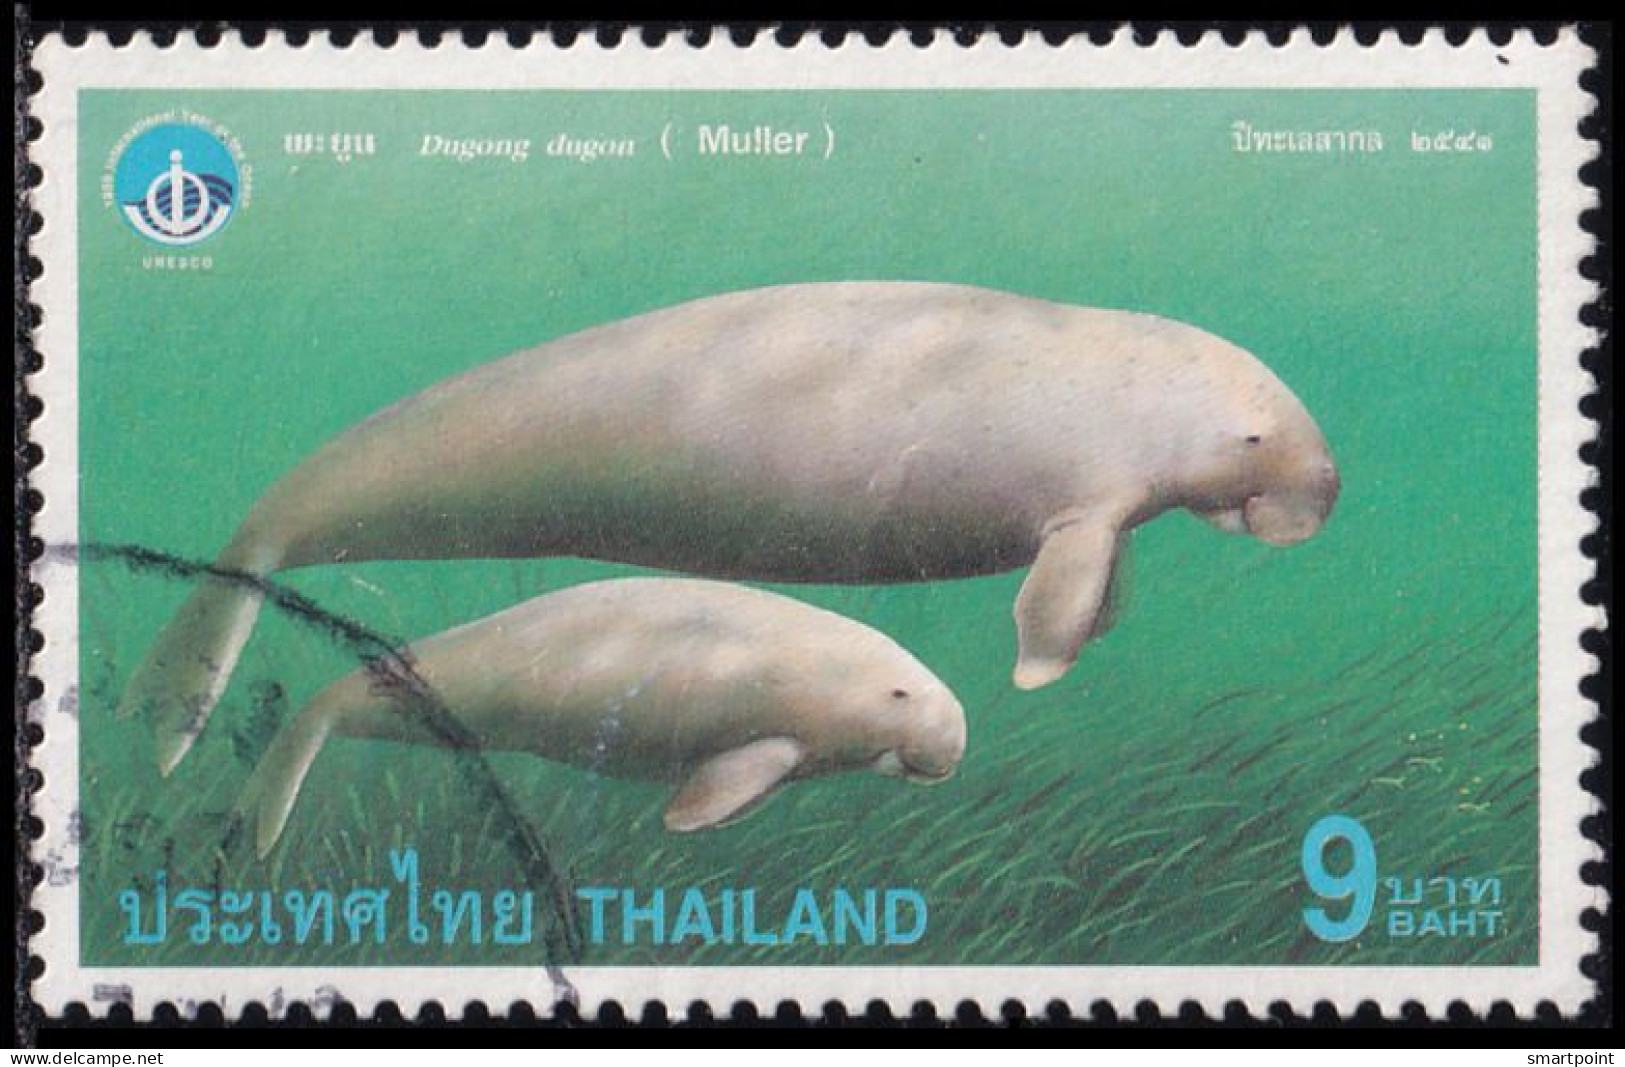 Thailand Stamp 1998 International Year Of The Ocean 9 Baht - Used - Thailand